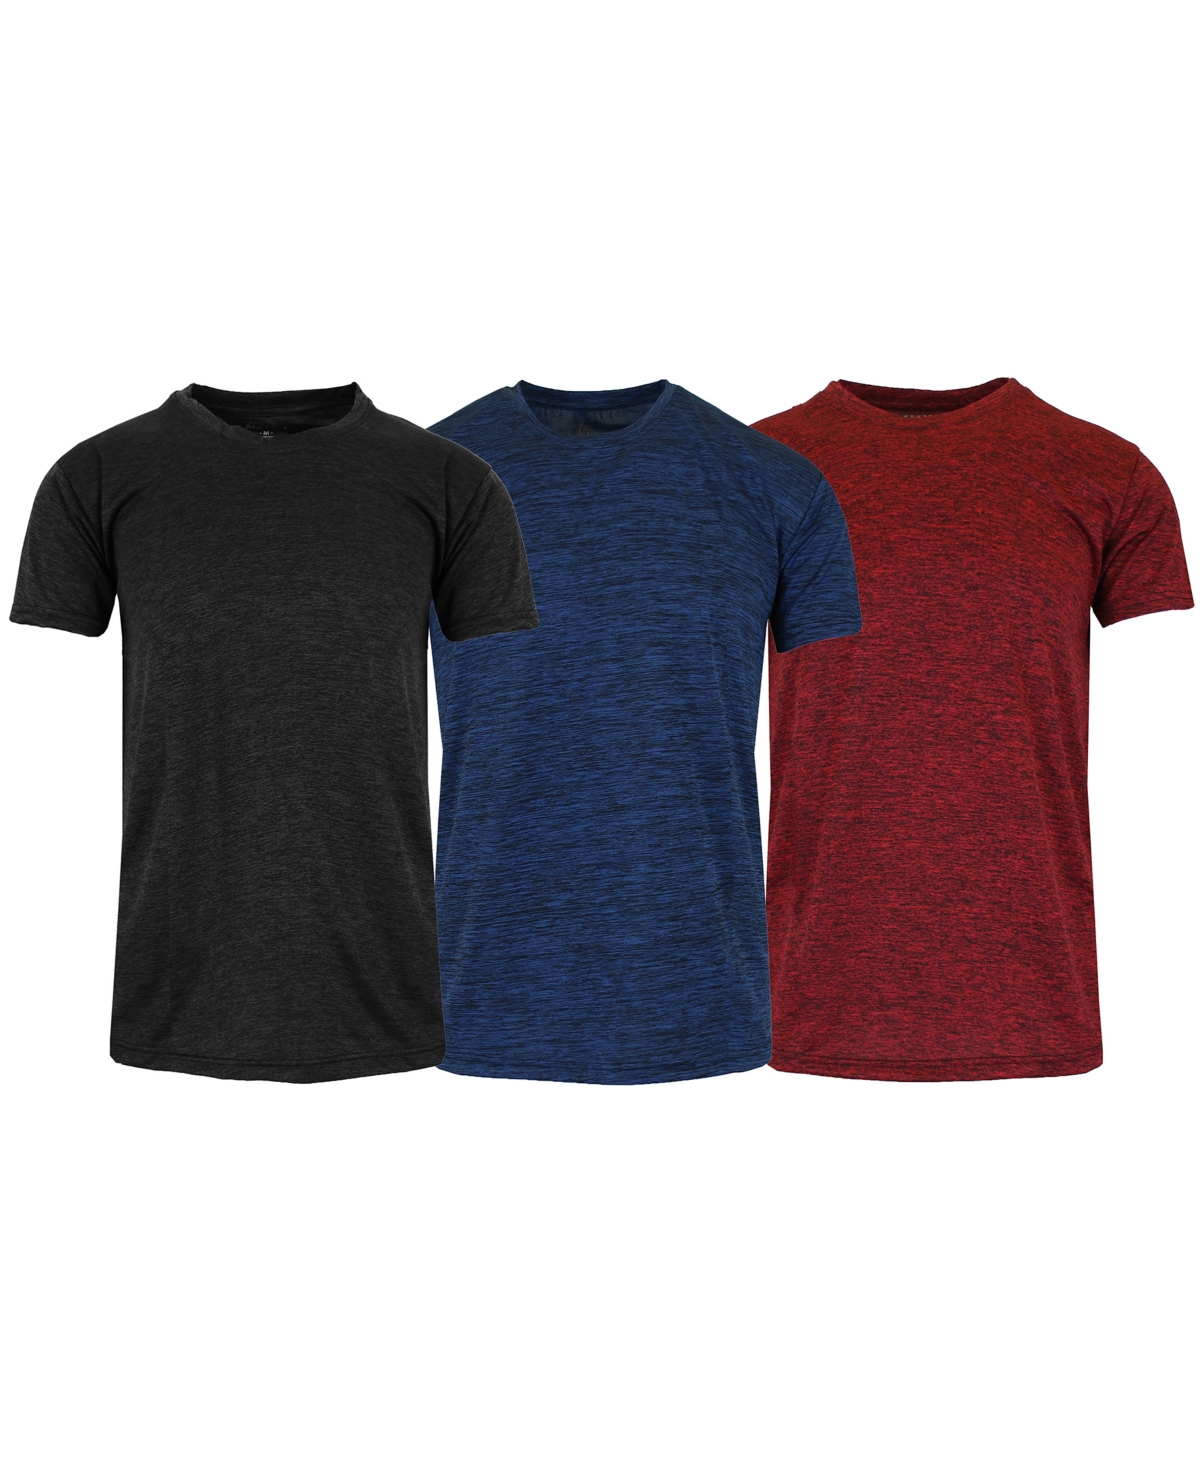 Galaxy By Harvic Men's Performance T-shirt, Pack Of 3 In Black,navy,red